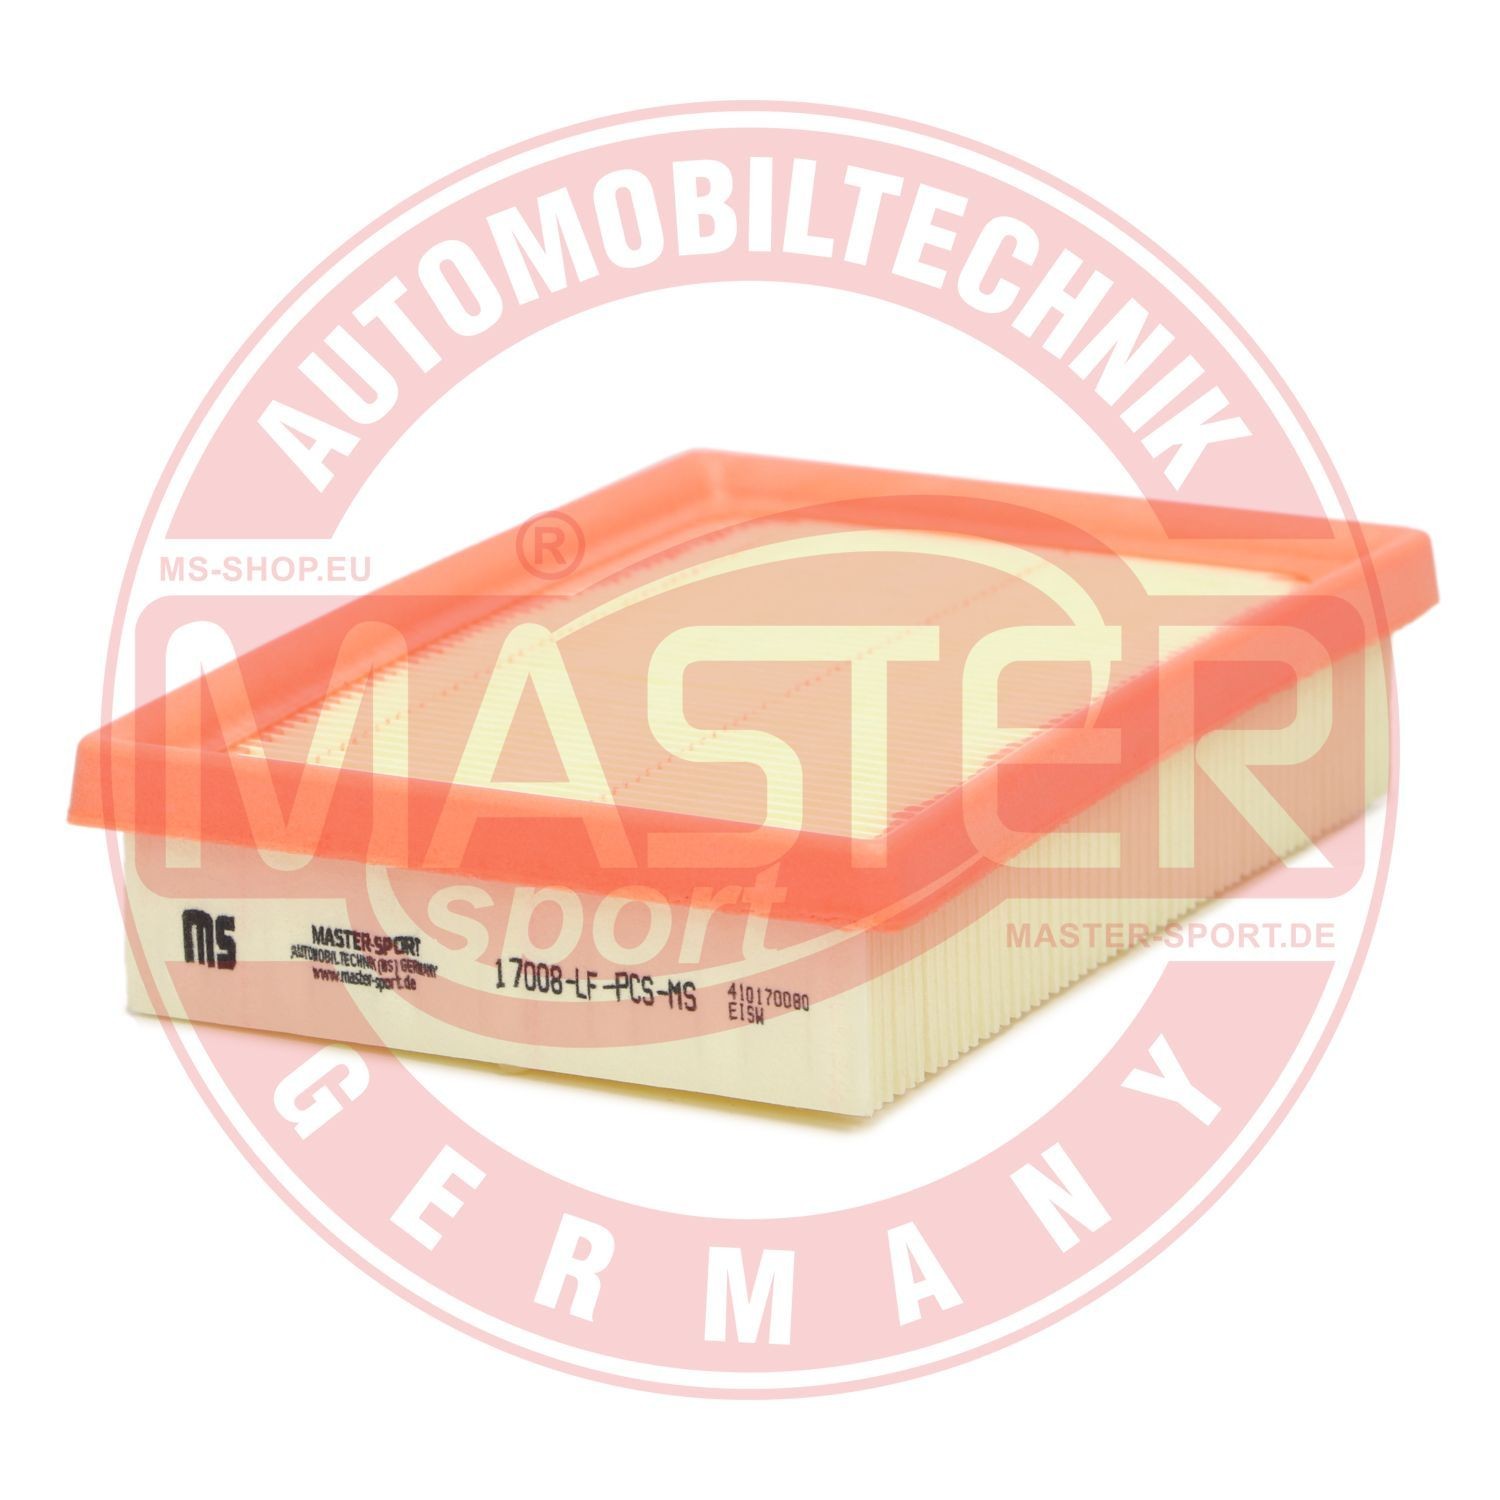 MASTER-SPORT 17008-LF-PCS-MS Air filter PEUGEOT experience and price